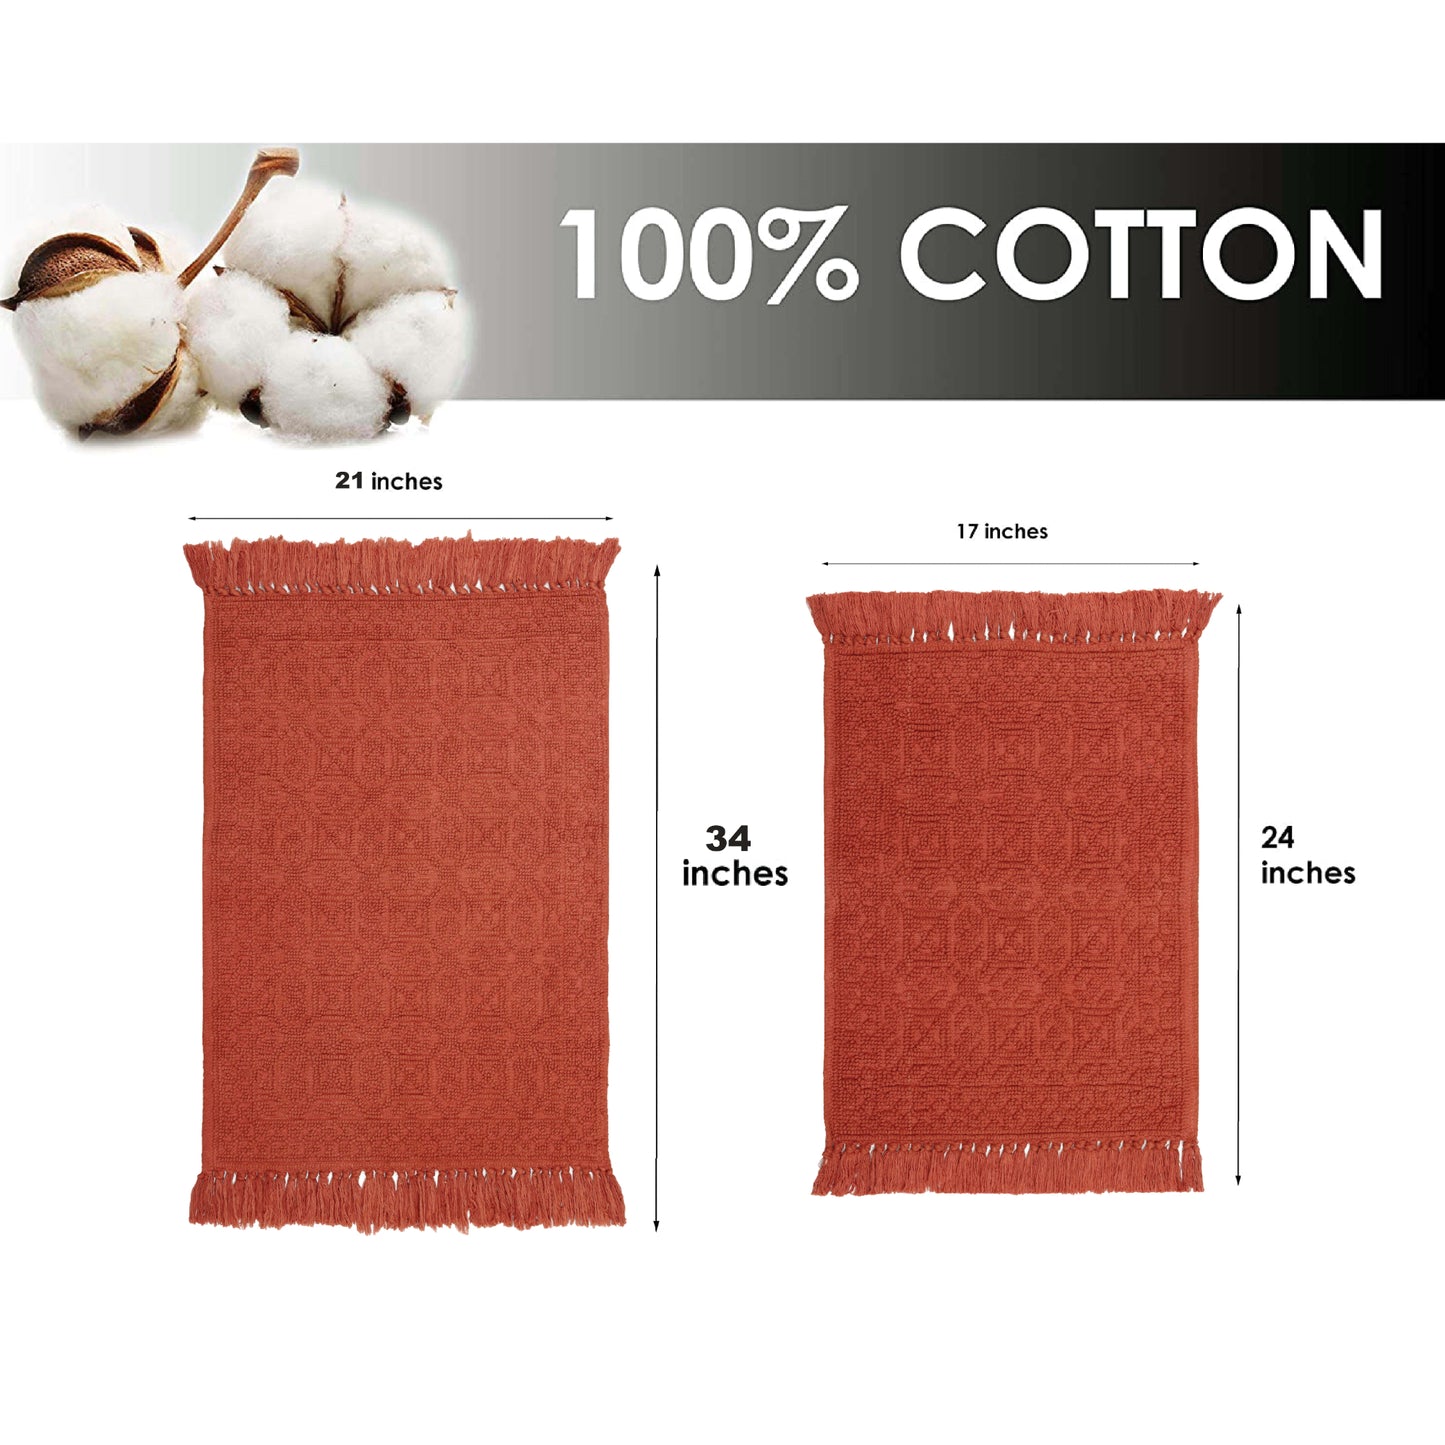 100% cotton hand woven water absorbent bathroom rugs (set of 2) - TreeWool Bathrugs#color_rust